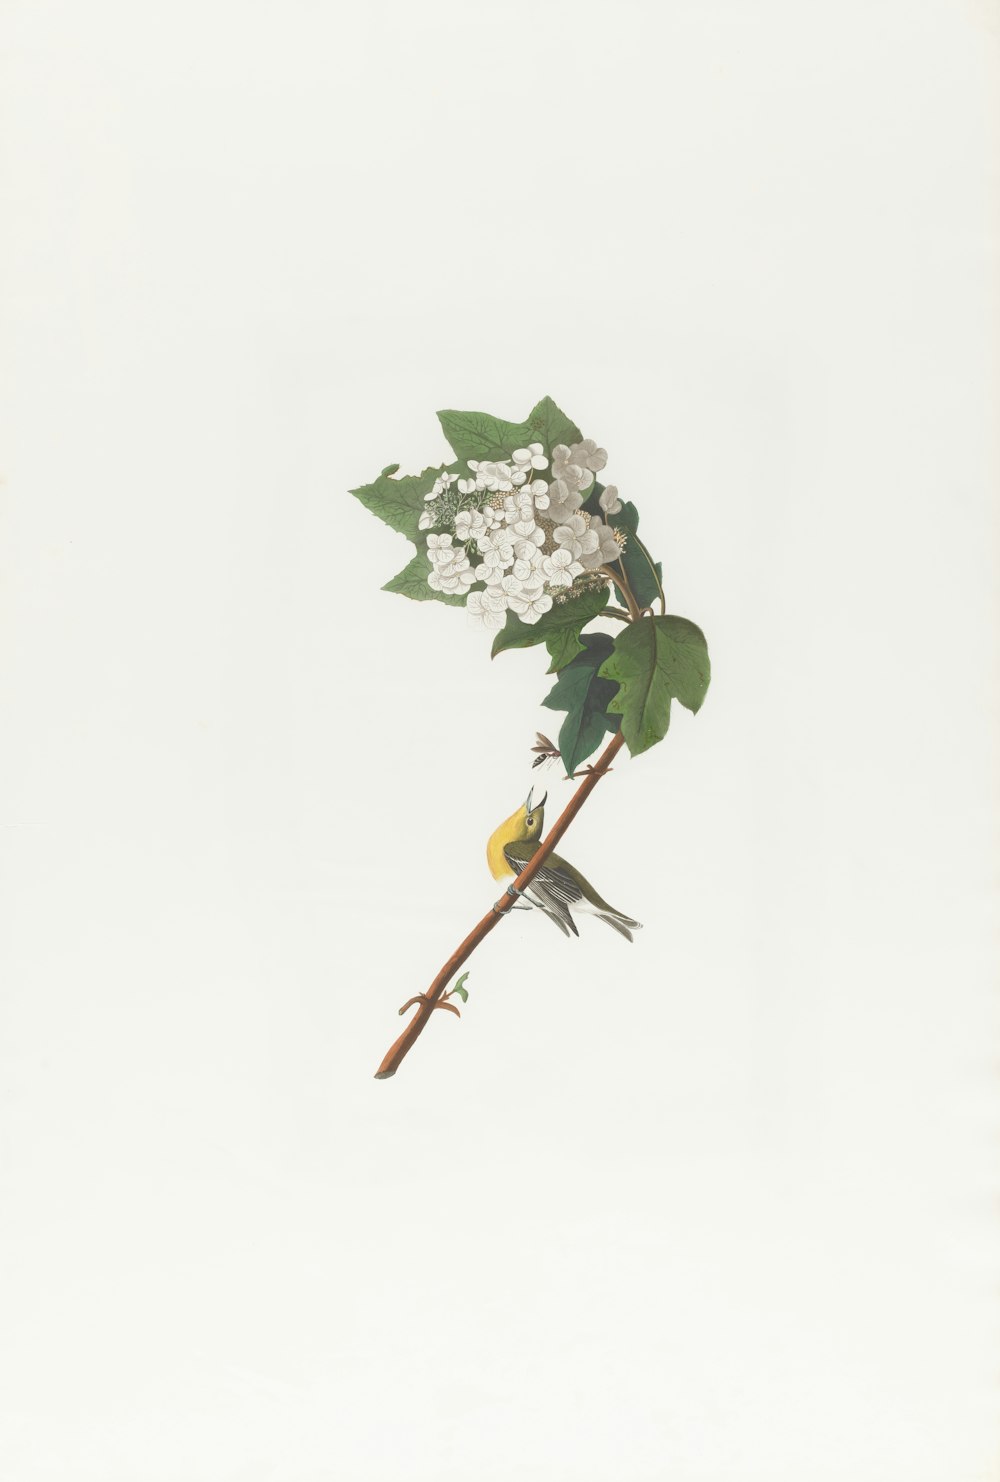 a bird sitting on a branch with white flowers